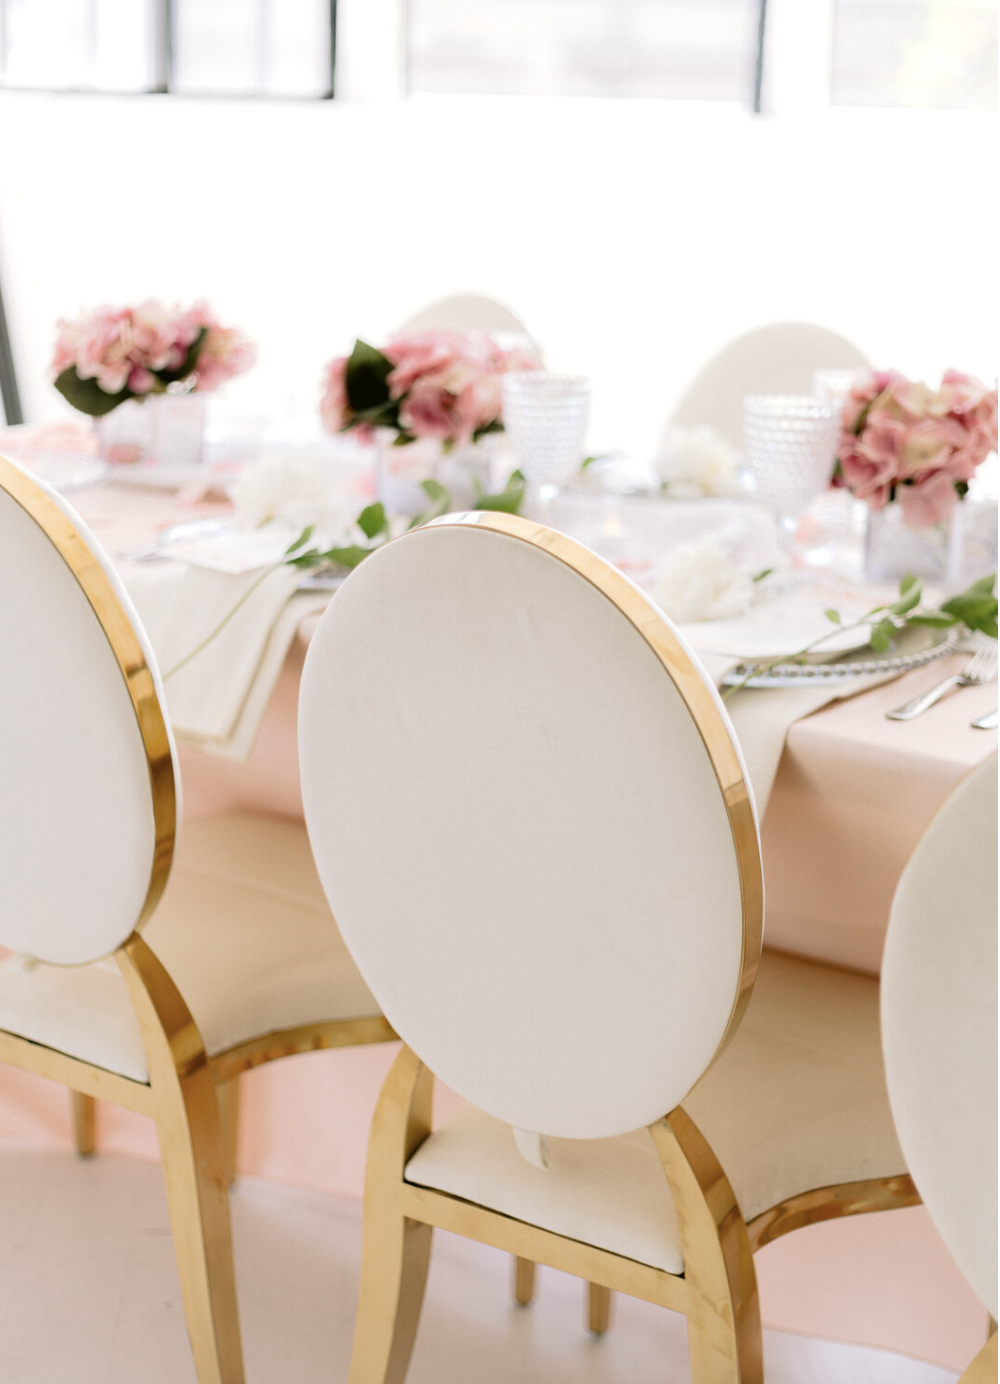 Why to Hire a Wedding Planner